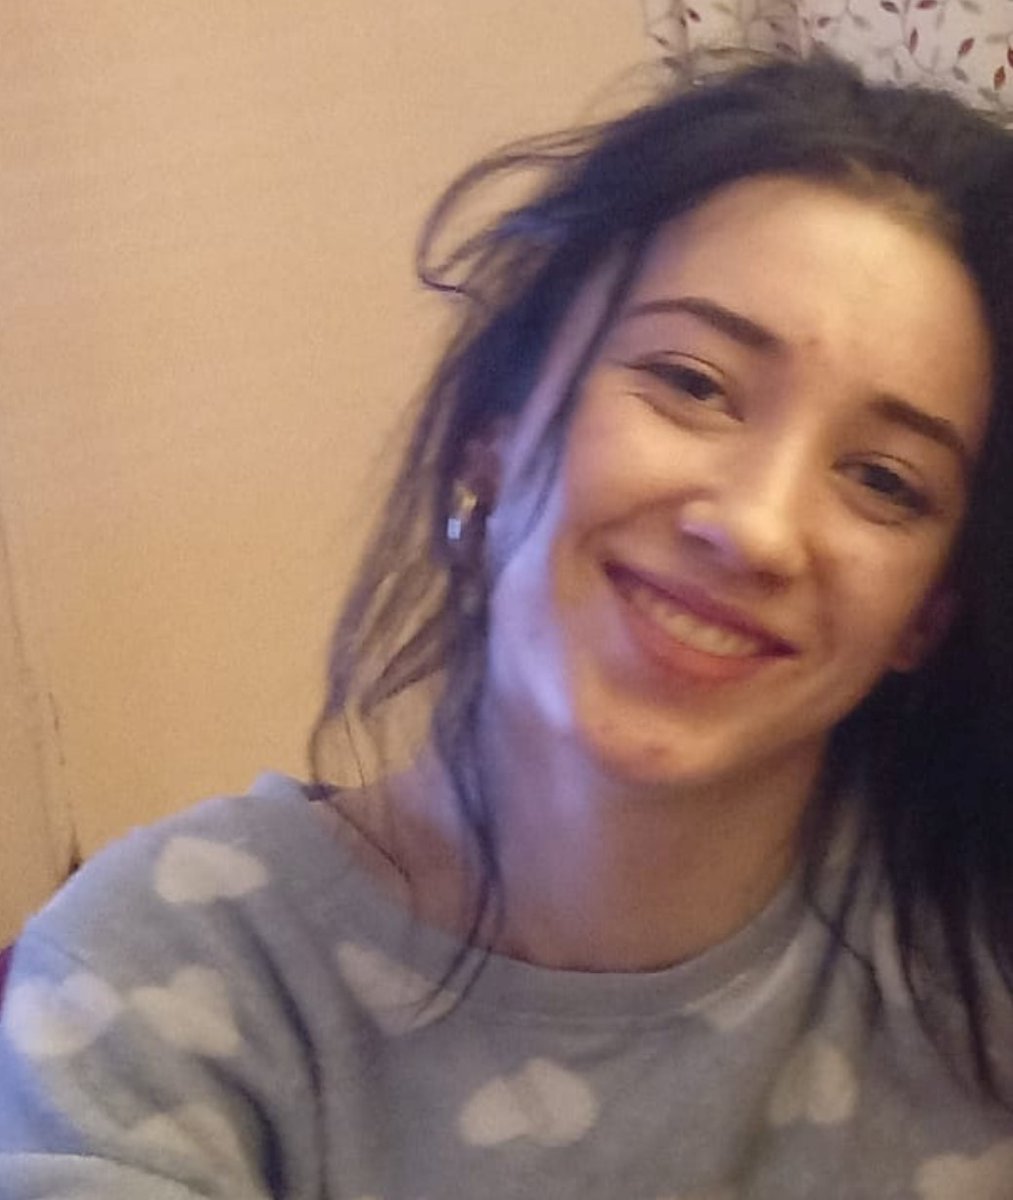 Gardaí have appealed for help from the public to trace the whereabouts of 17-year-old Charlotte Conway. Charlotte was last seen in Limerick city at around 5.30pm on Thursday, 14 December after travelling from Waterford.